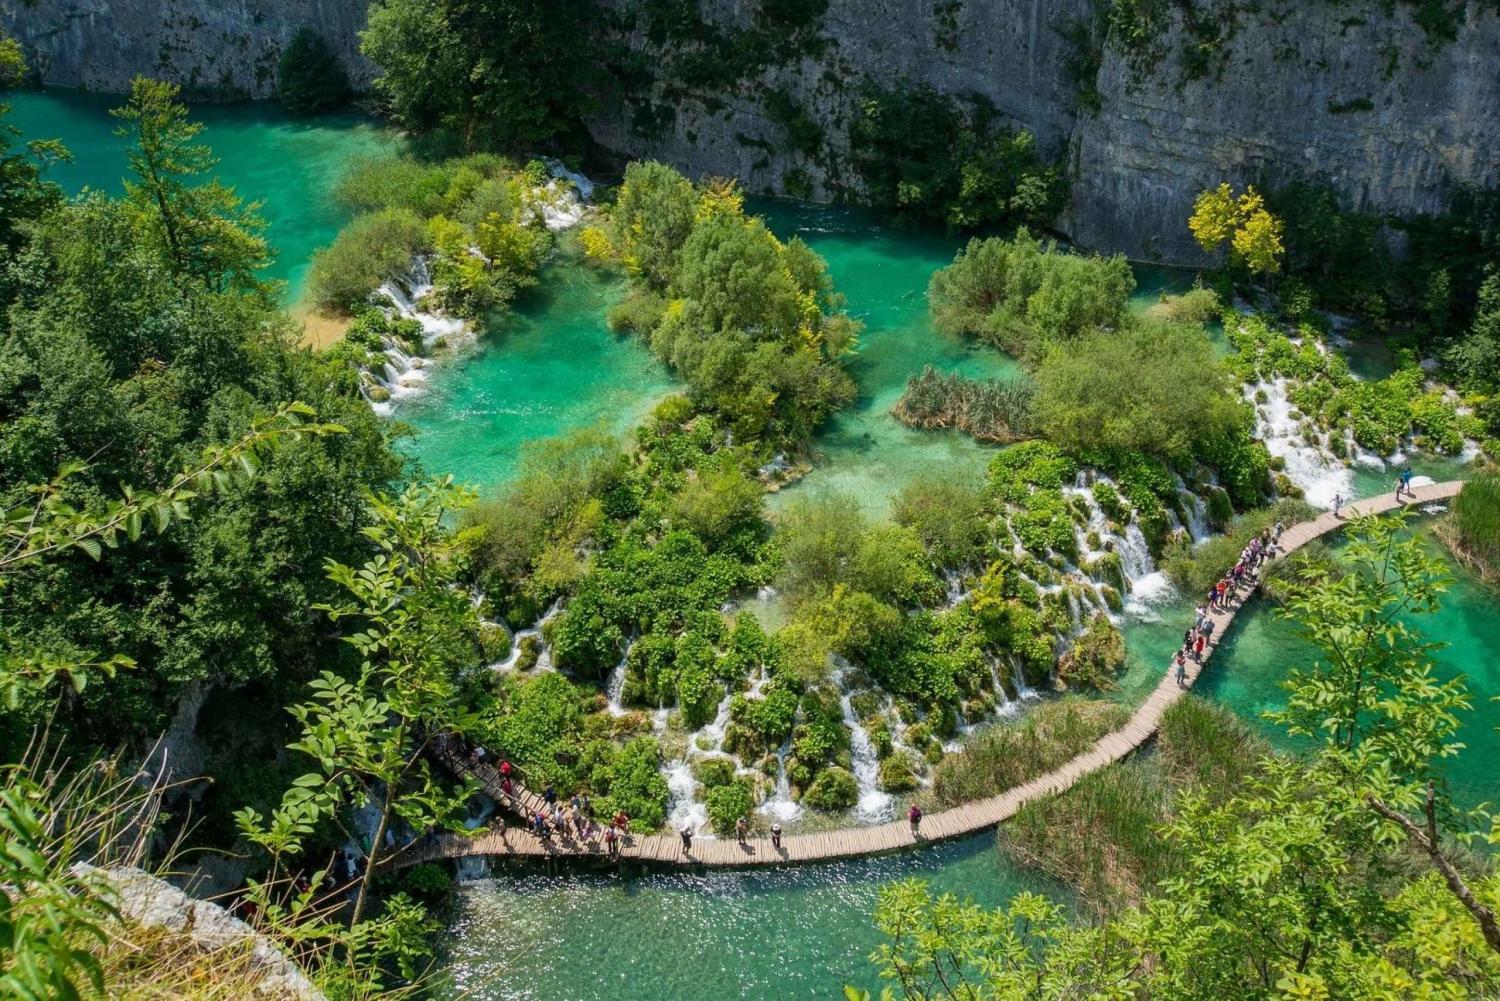 Private tour: From Opatija: Plitvice Lakes